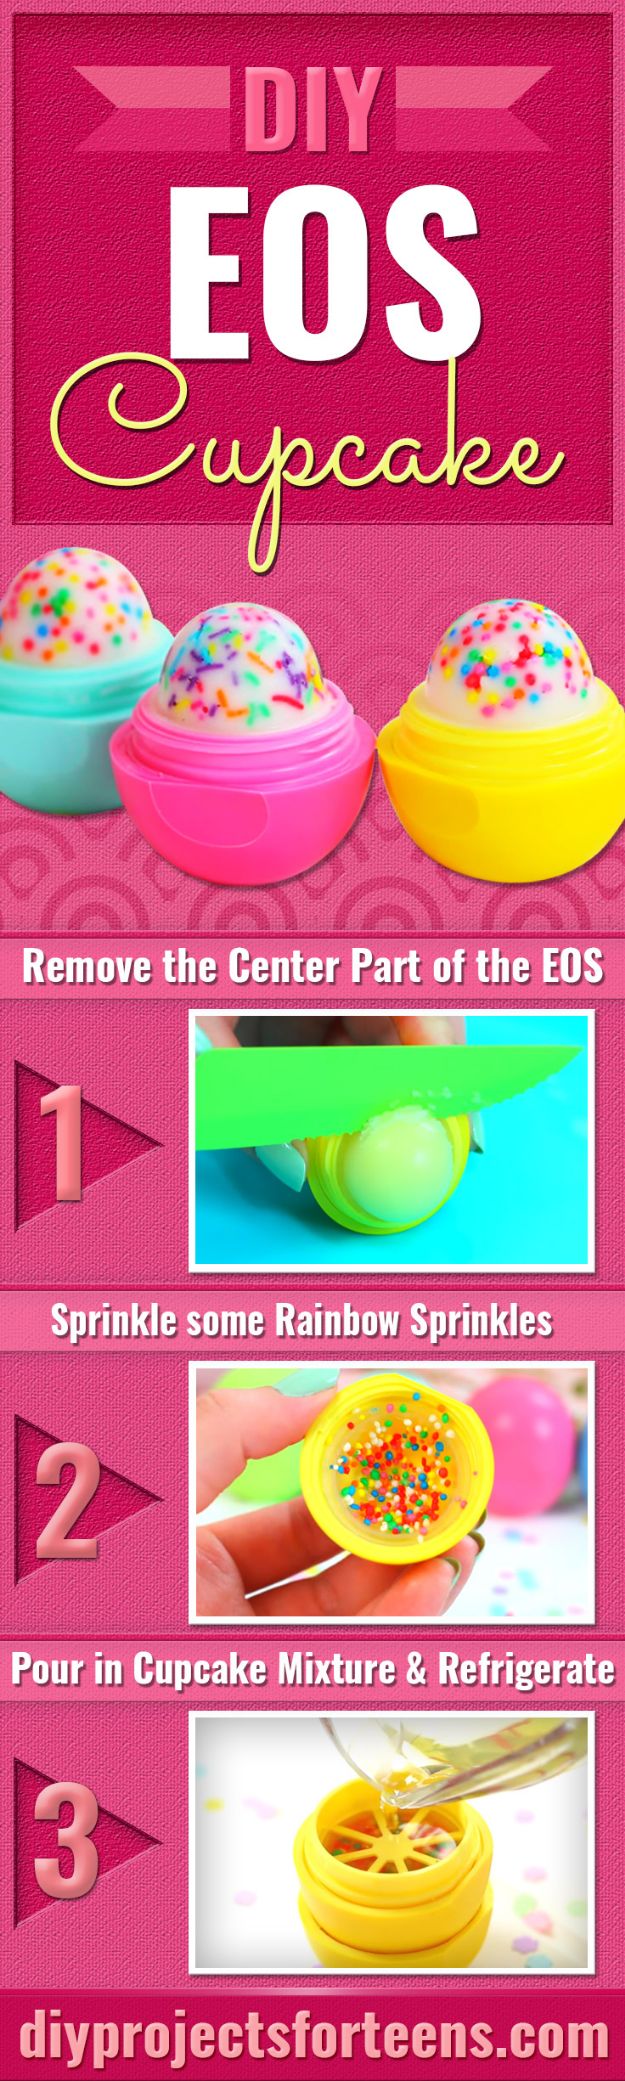 Easy Crafts for Teen Girls | How to Make DIY Cupcake EOS l Fun Craft and DIY Ideas for Teenagers and Tween Girl | Room Decor and Gifts